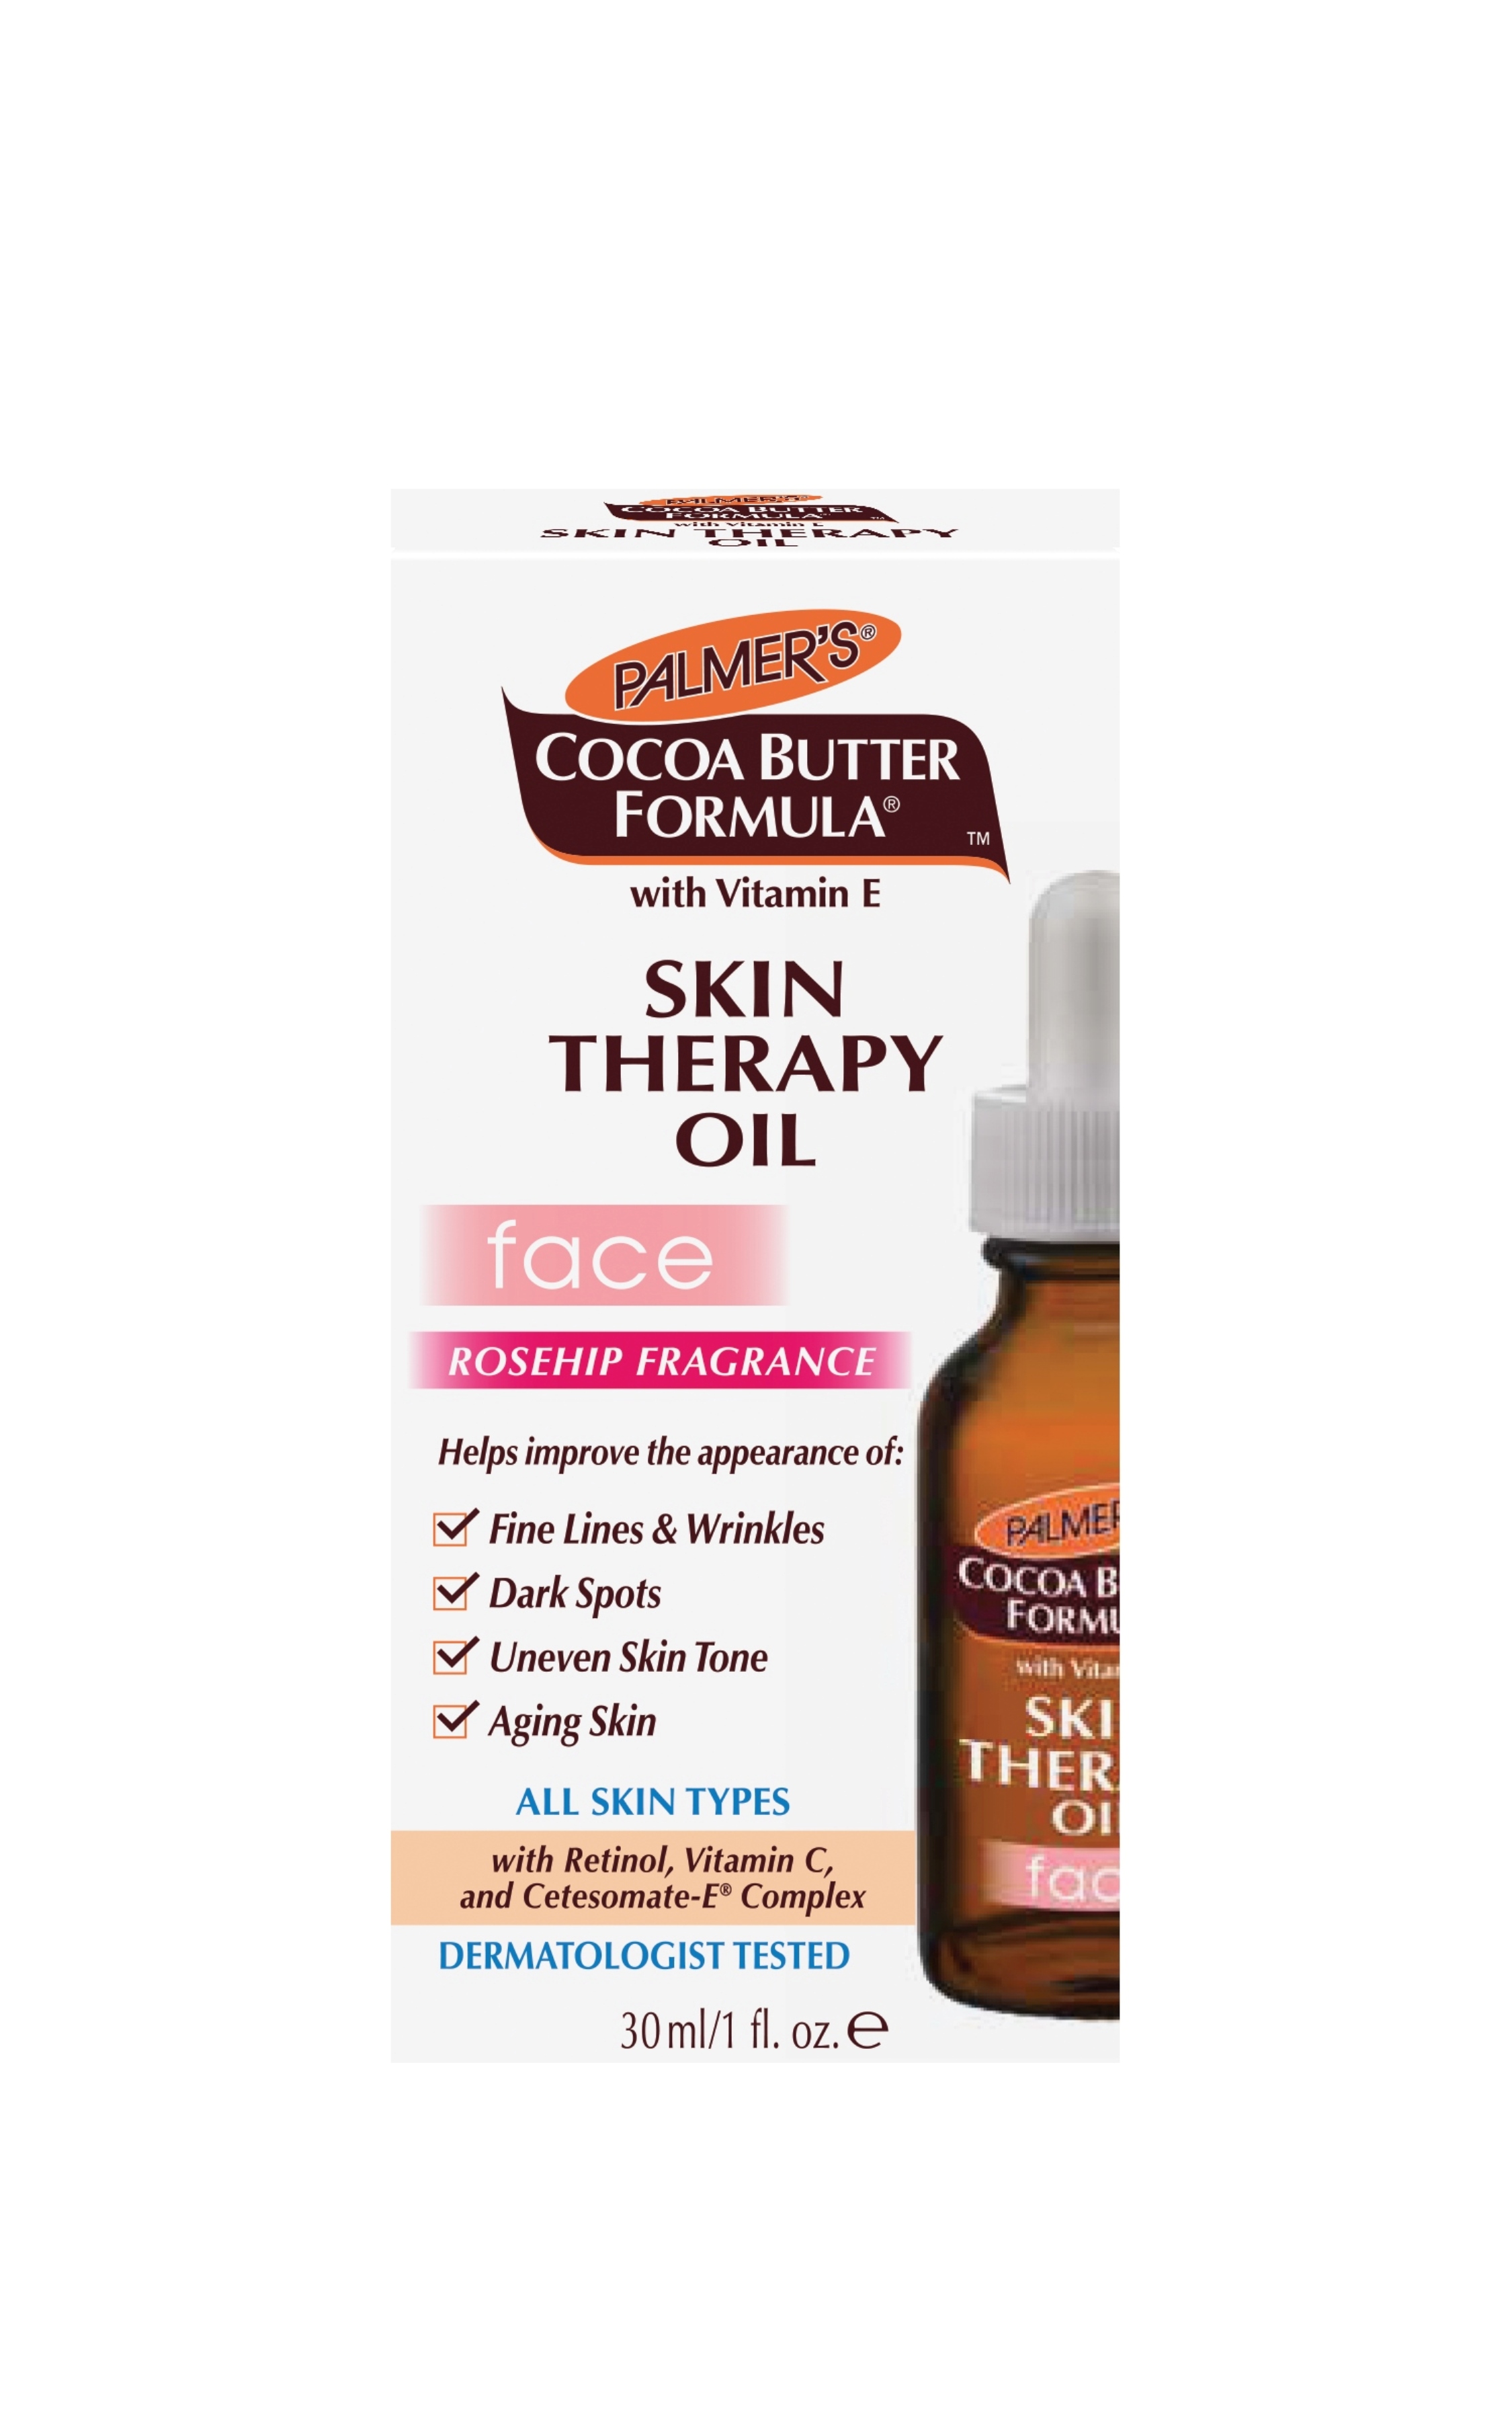 Palmer's Skin Therapy Oil  Face  with Vitamin E  Rosehip Fragrance  1 oz (30 ml)